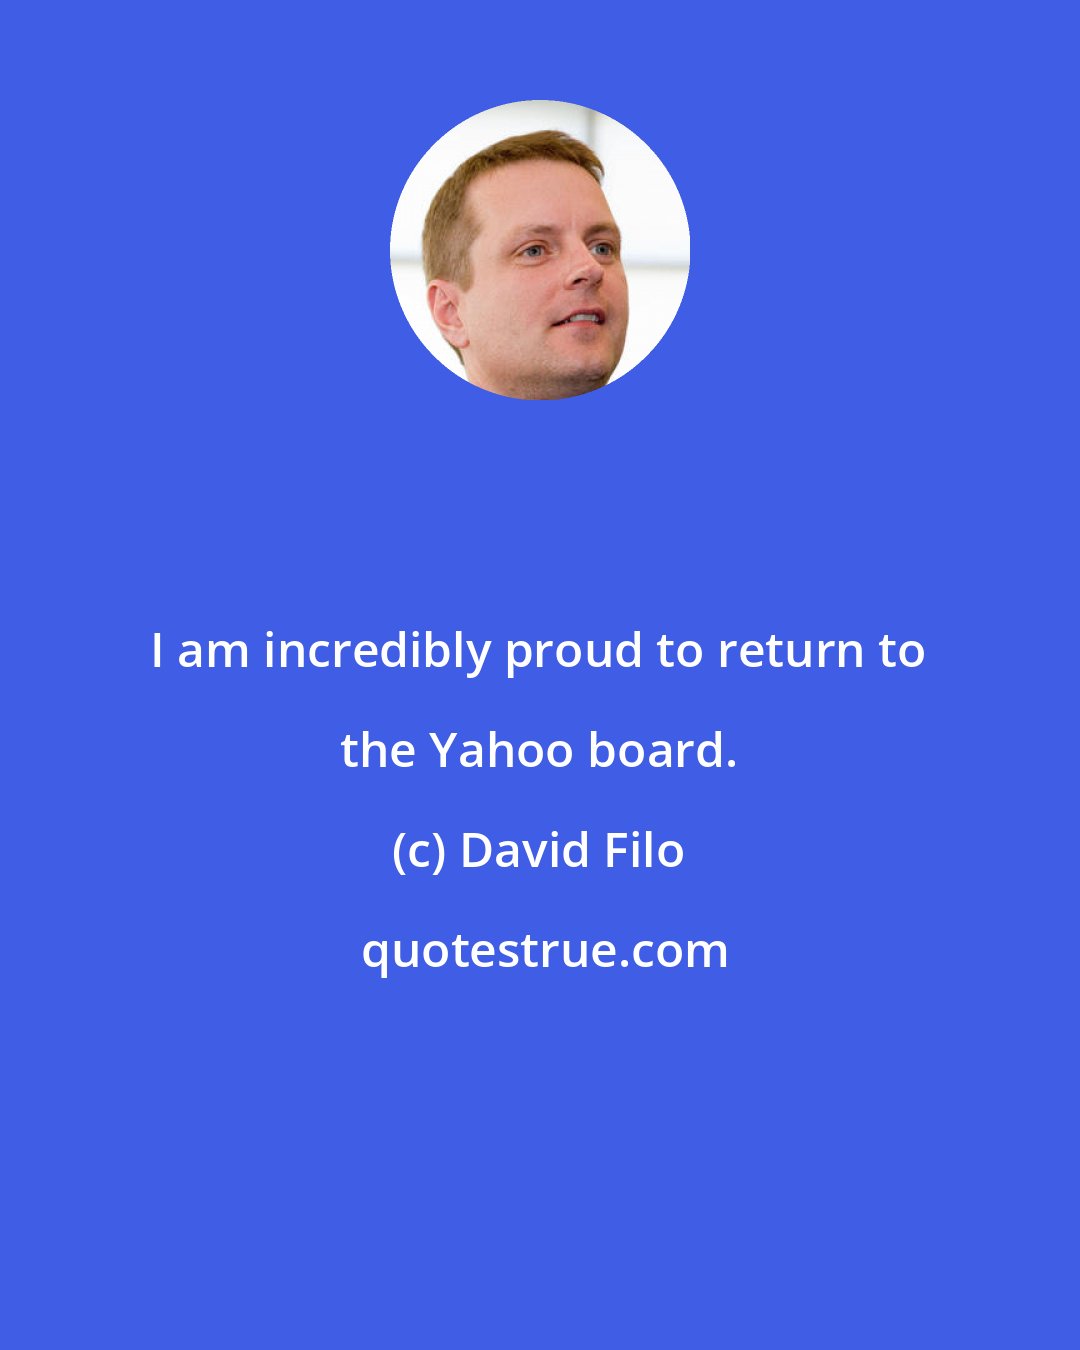 David Filo: I am incredibly proud to return to the Yahoo board.